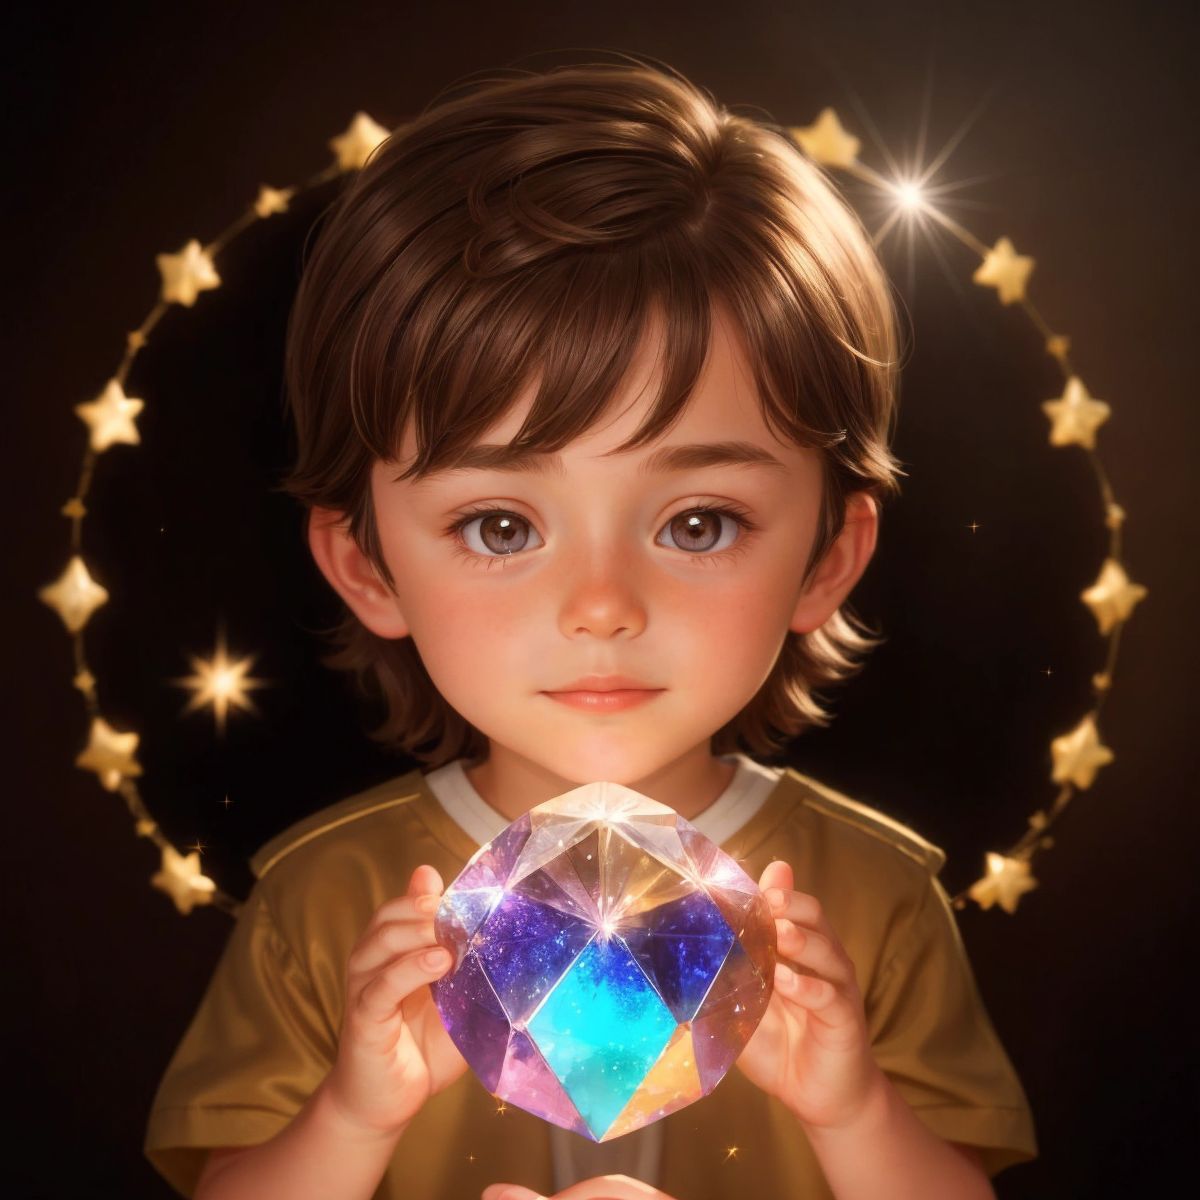 Alex holding a shimmering crystal, with a soft glow reflecting his face filled with gratitude.